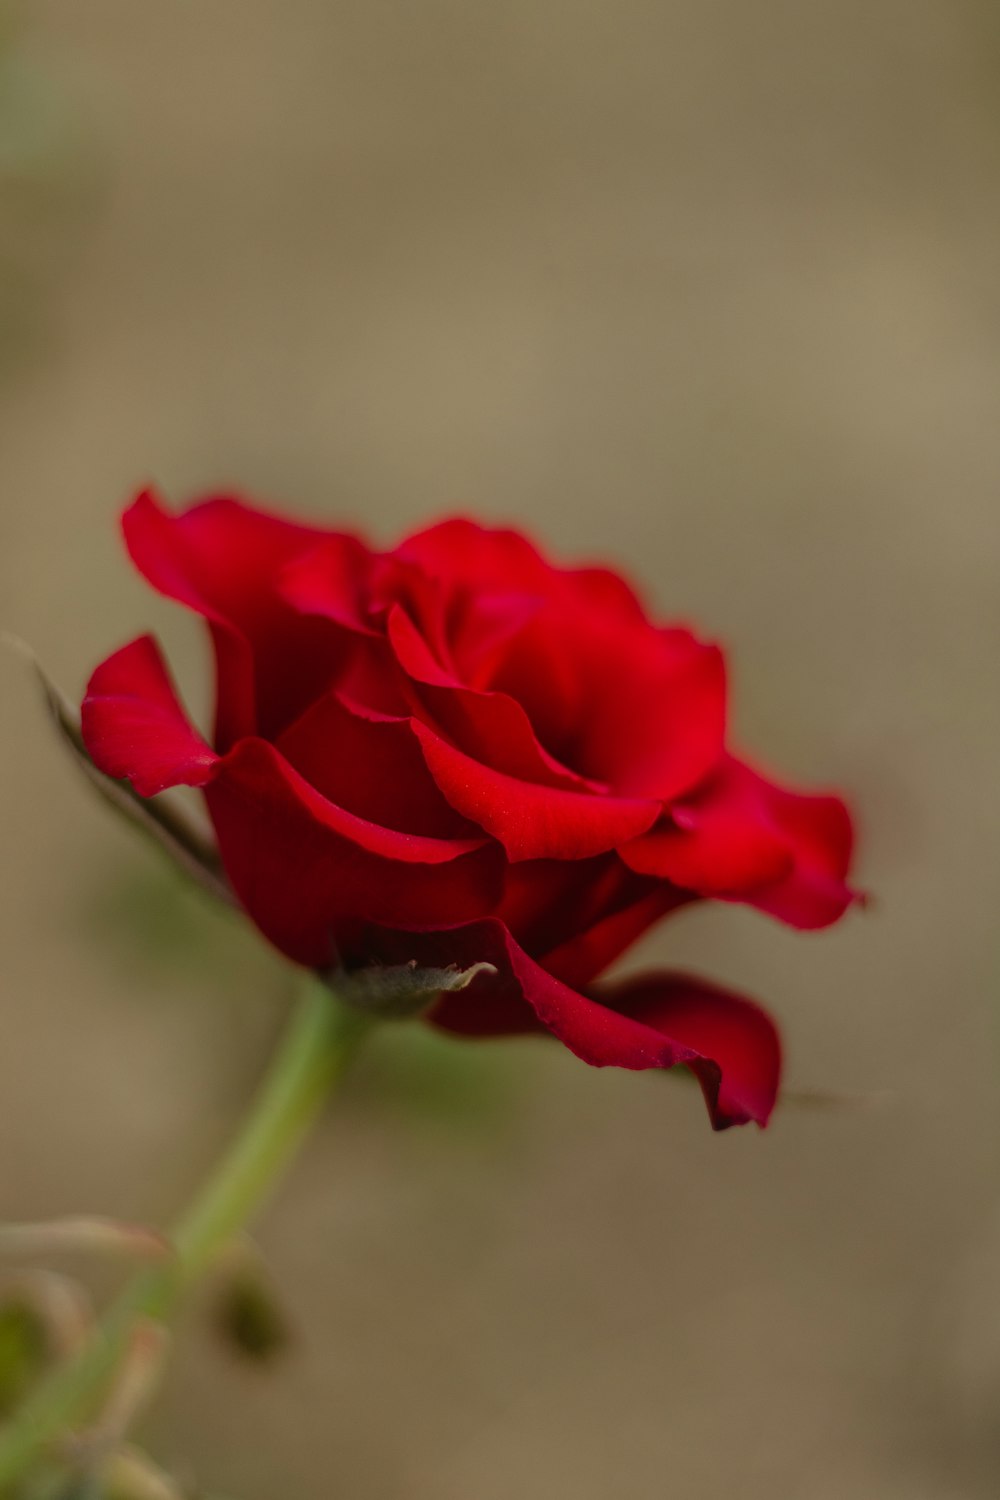 a close up of a single red rose